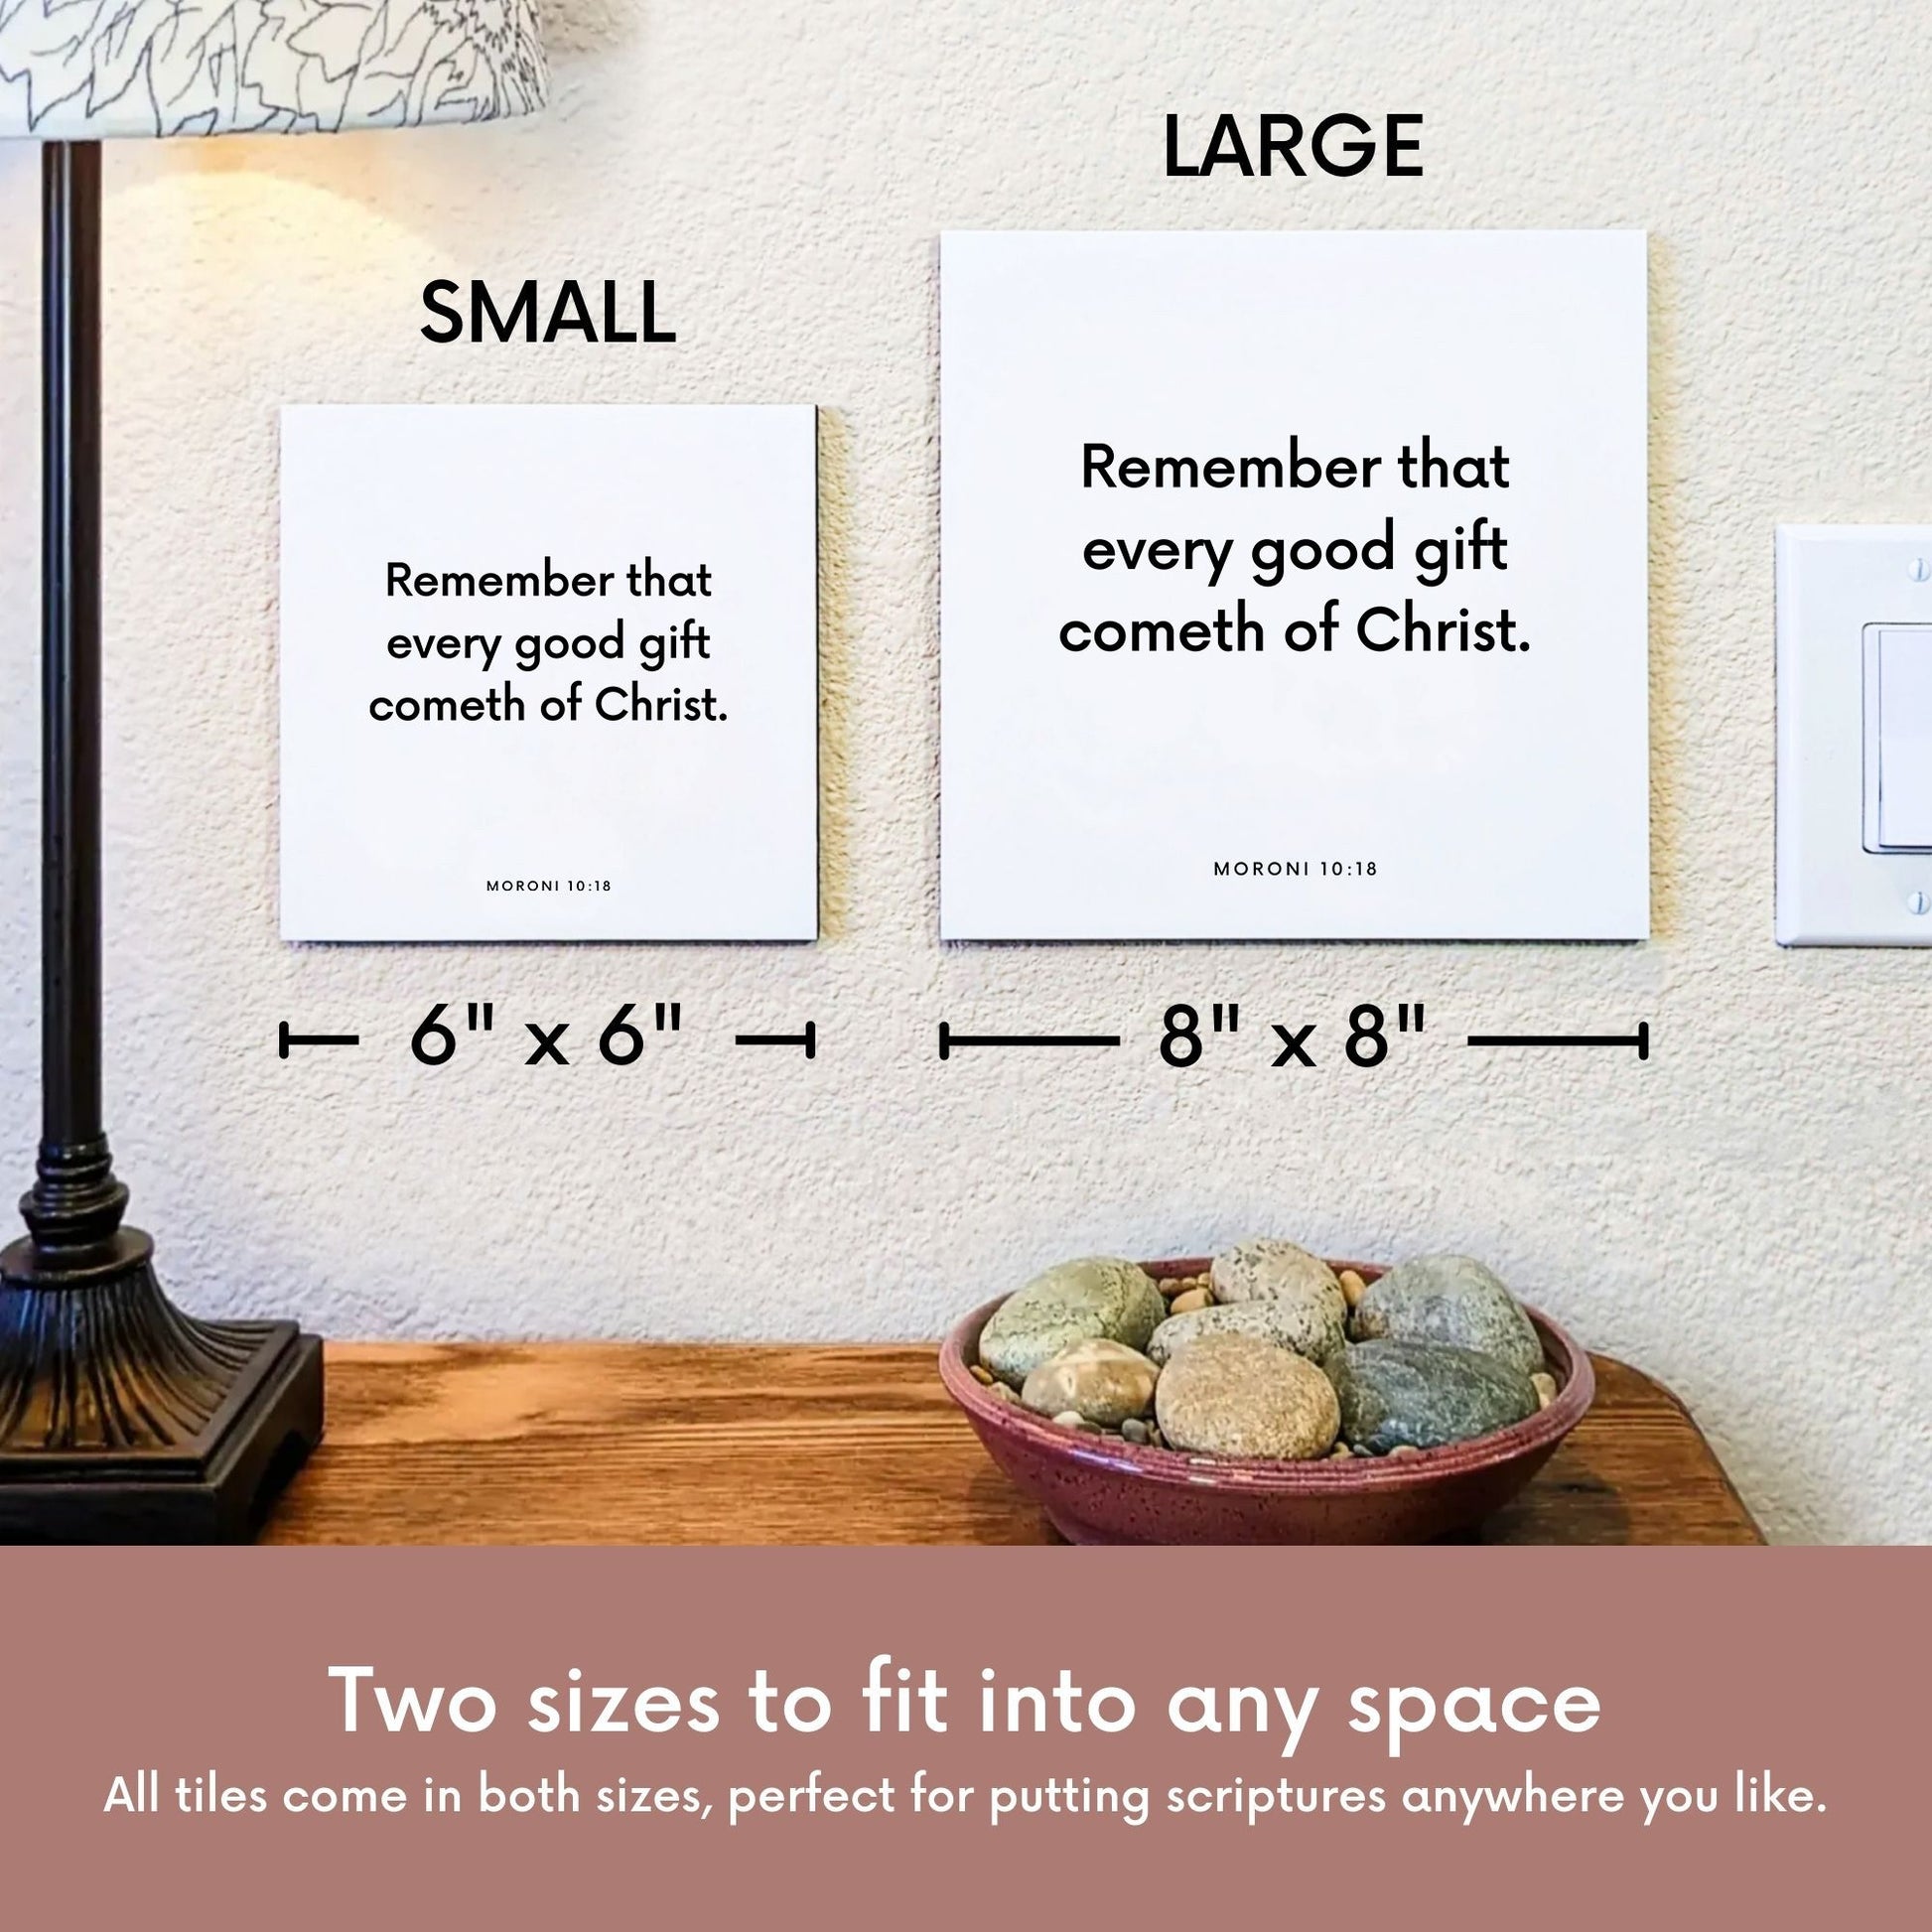 Scripture tile size comparison for Moroni 10:18 - "Every good gift cometh of Christ"